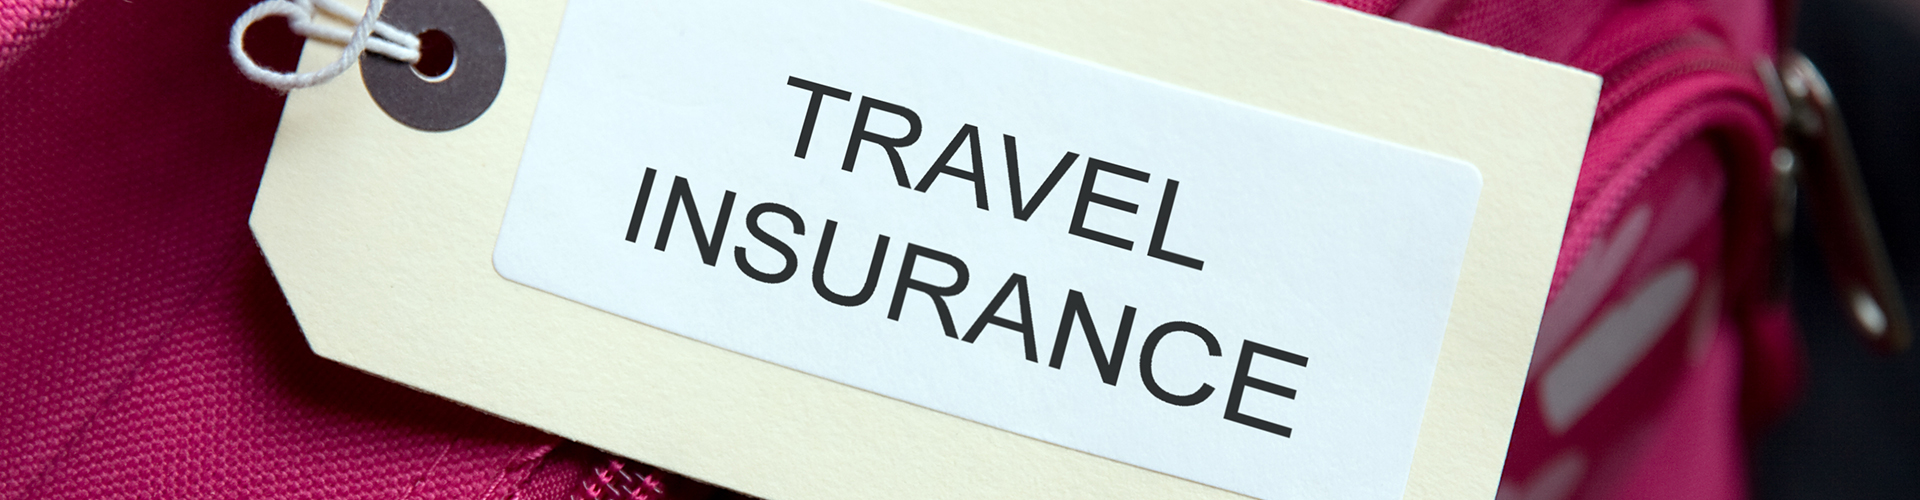 Funny Travel Insurance Stories